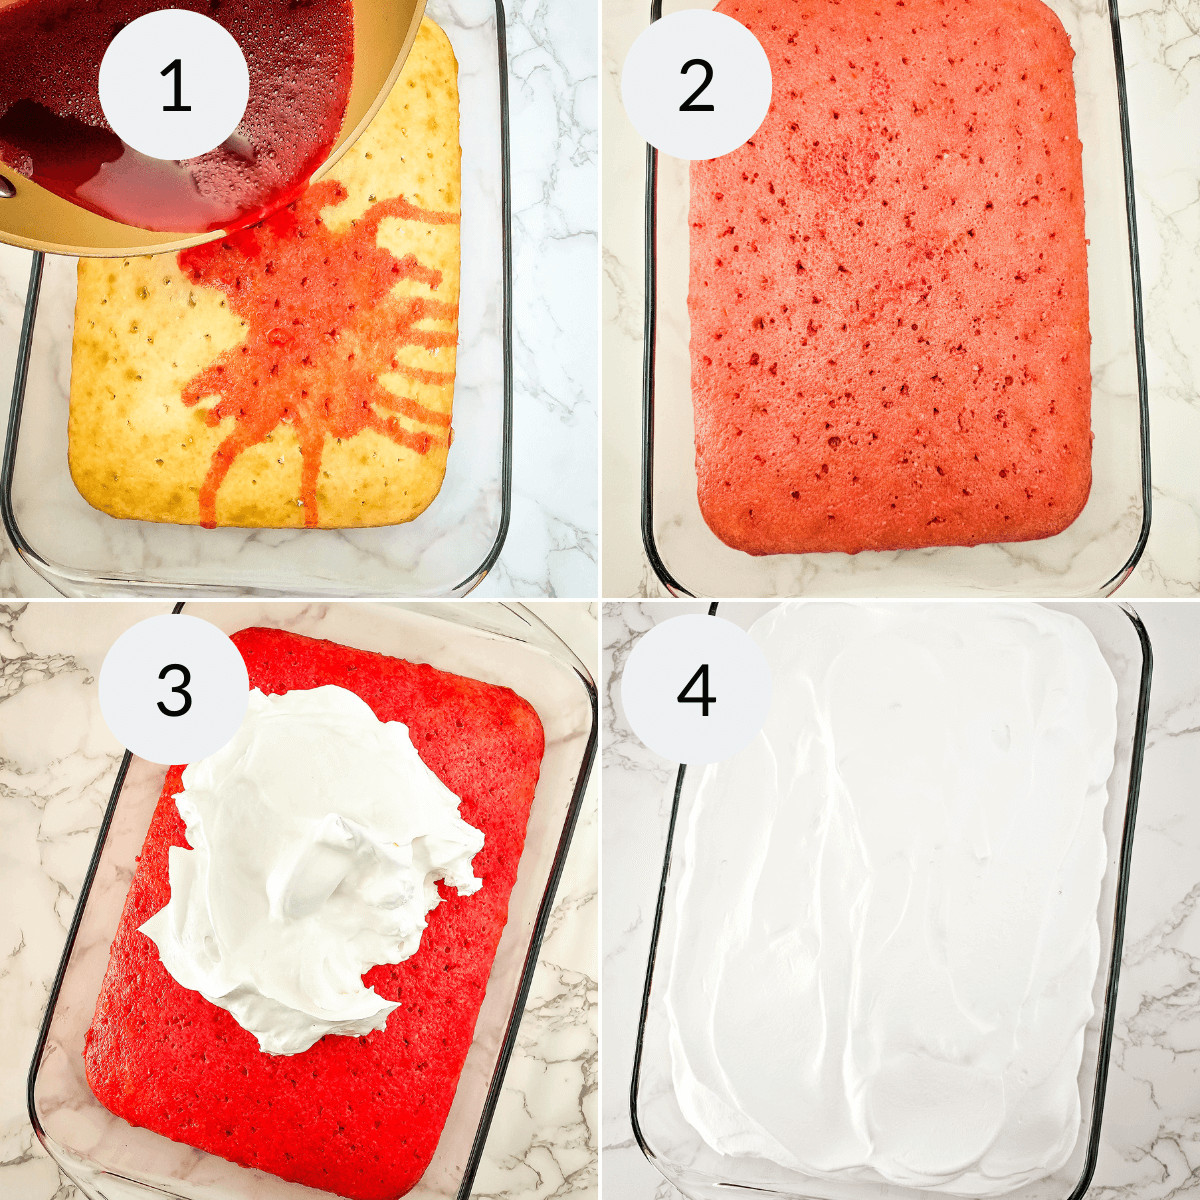 Four step collage showing the process of making the dessert 1) pouring red cherry syrup on a yellow cake. 2) cake absorbing syrup. 3) topping with whipped cream. 